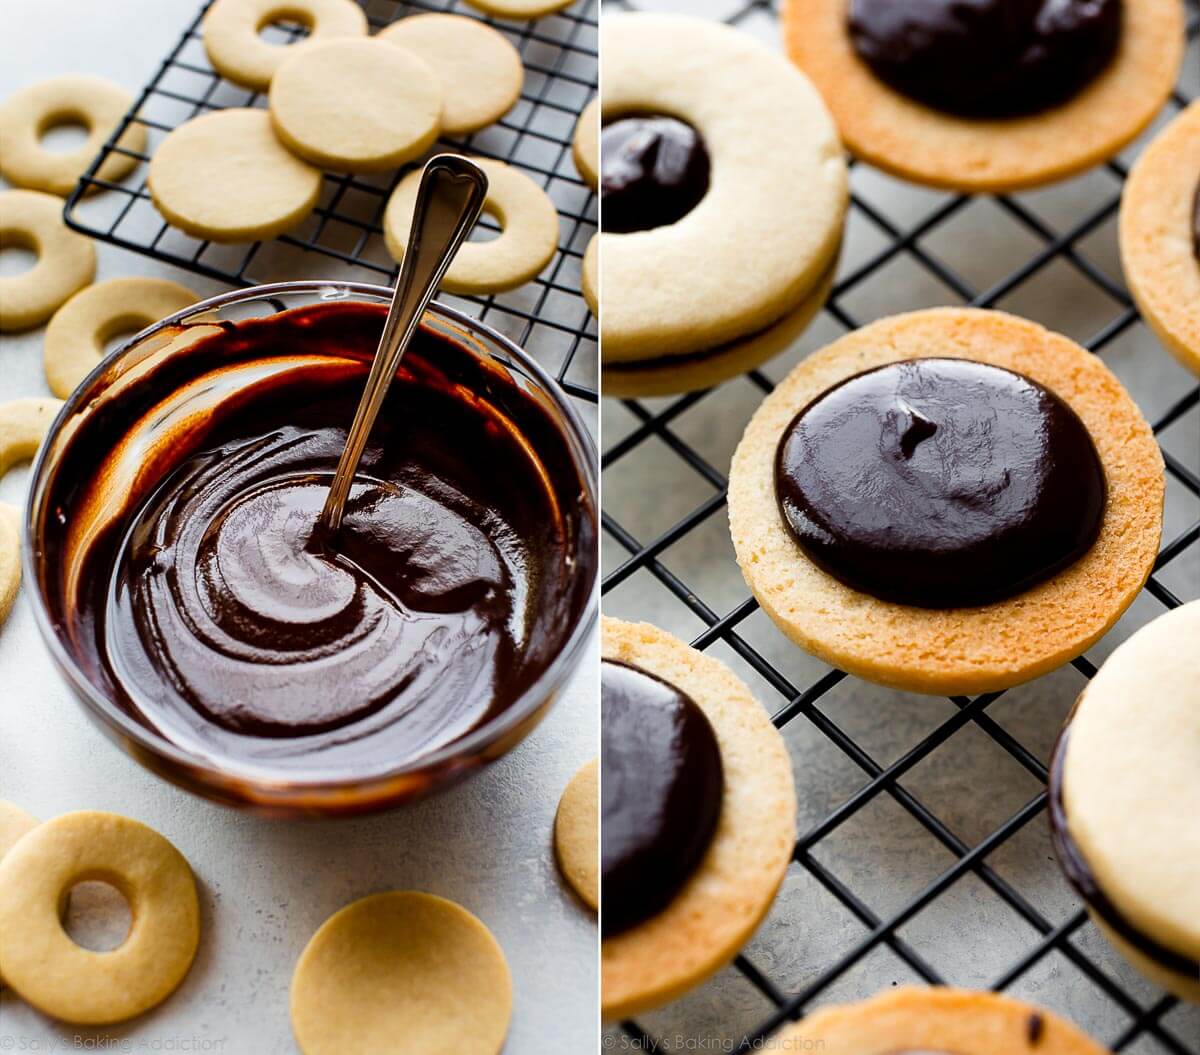 2 images of chocolate ganache in a glass bowl and chocolate ganache spread onto the bottom cookies